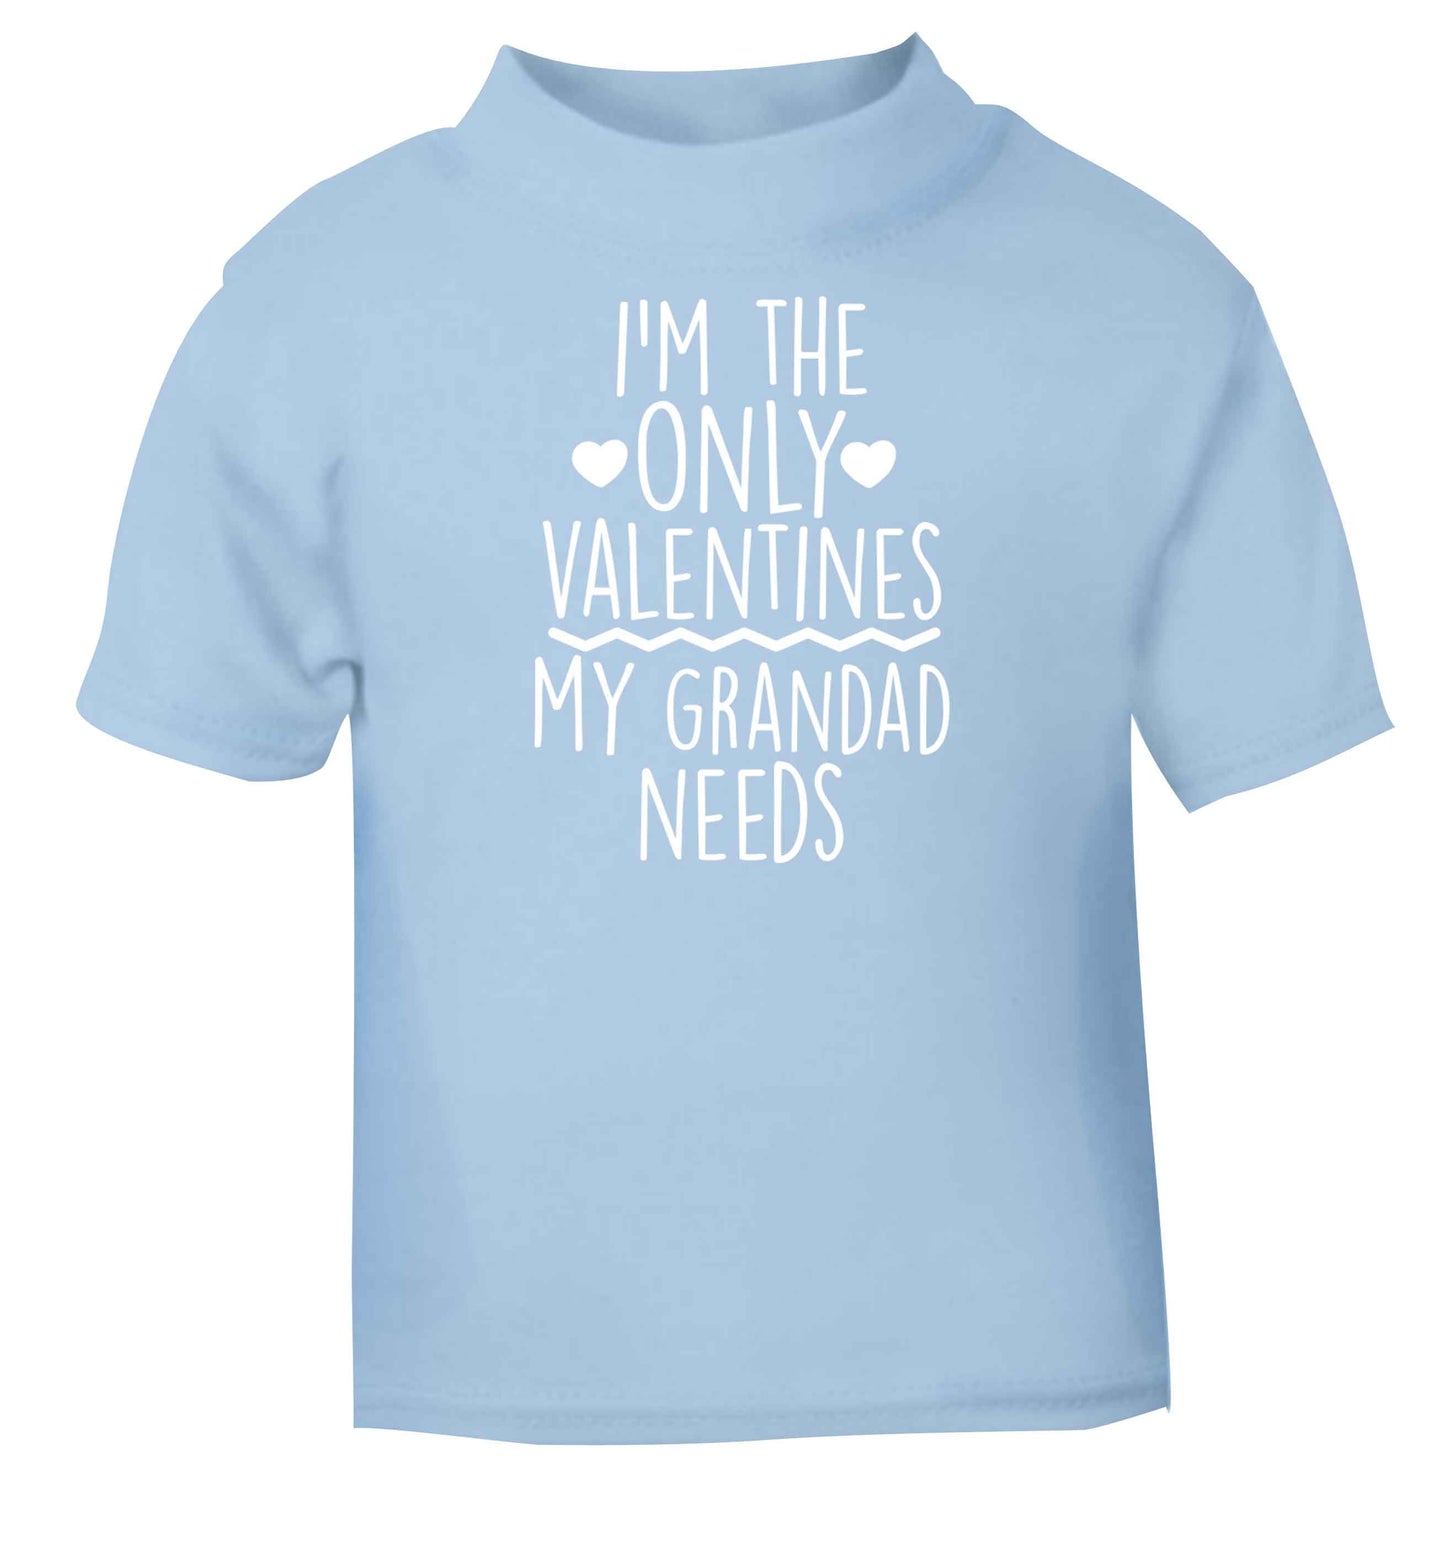 I'm the only valentines my grandad needs light blue baby toddler Tshirt 2 Years